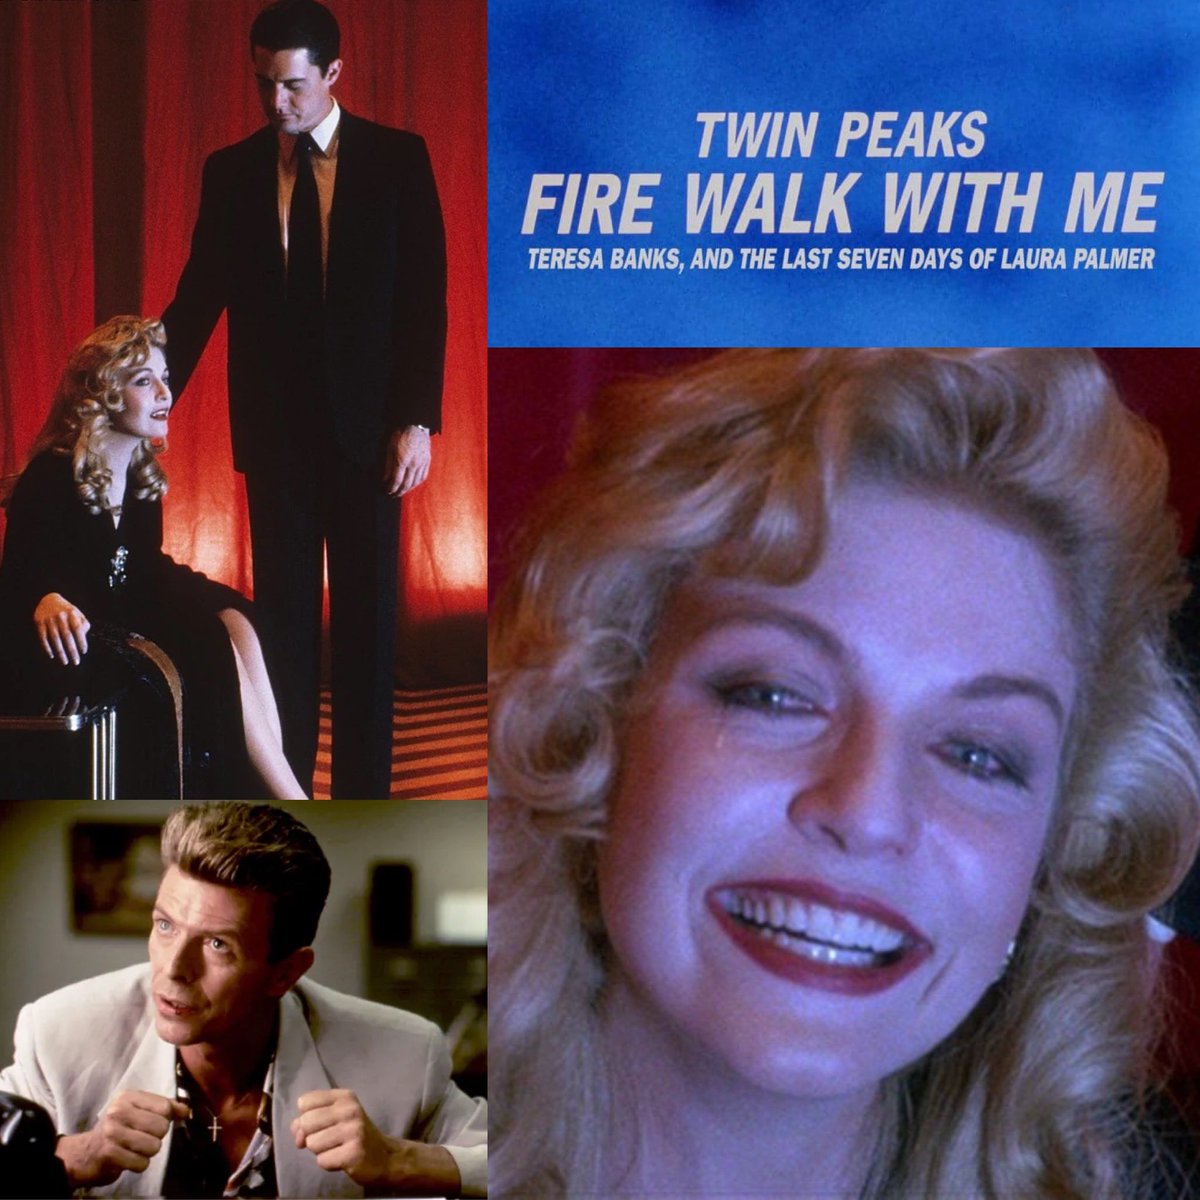 ‘We live inside a dream’ Finally saw TWIN PEAKS: FIRE WALK WITH ME today on the big screen at the @ThePCCLondon. I love every moment of this film, blockbuster performances from Sheryl Lee and Ray Wise plus top tier direction from David Lynch! Any fans Twin Peaks out there?